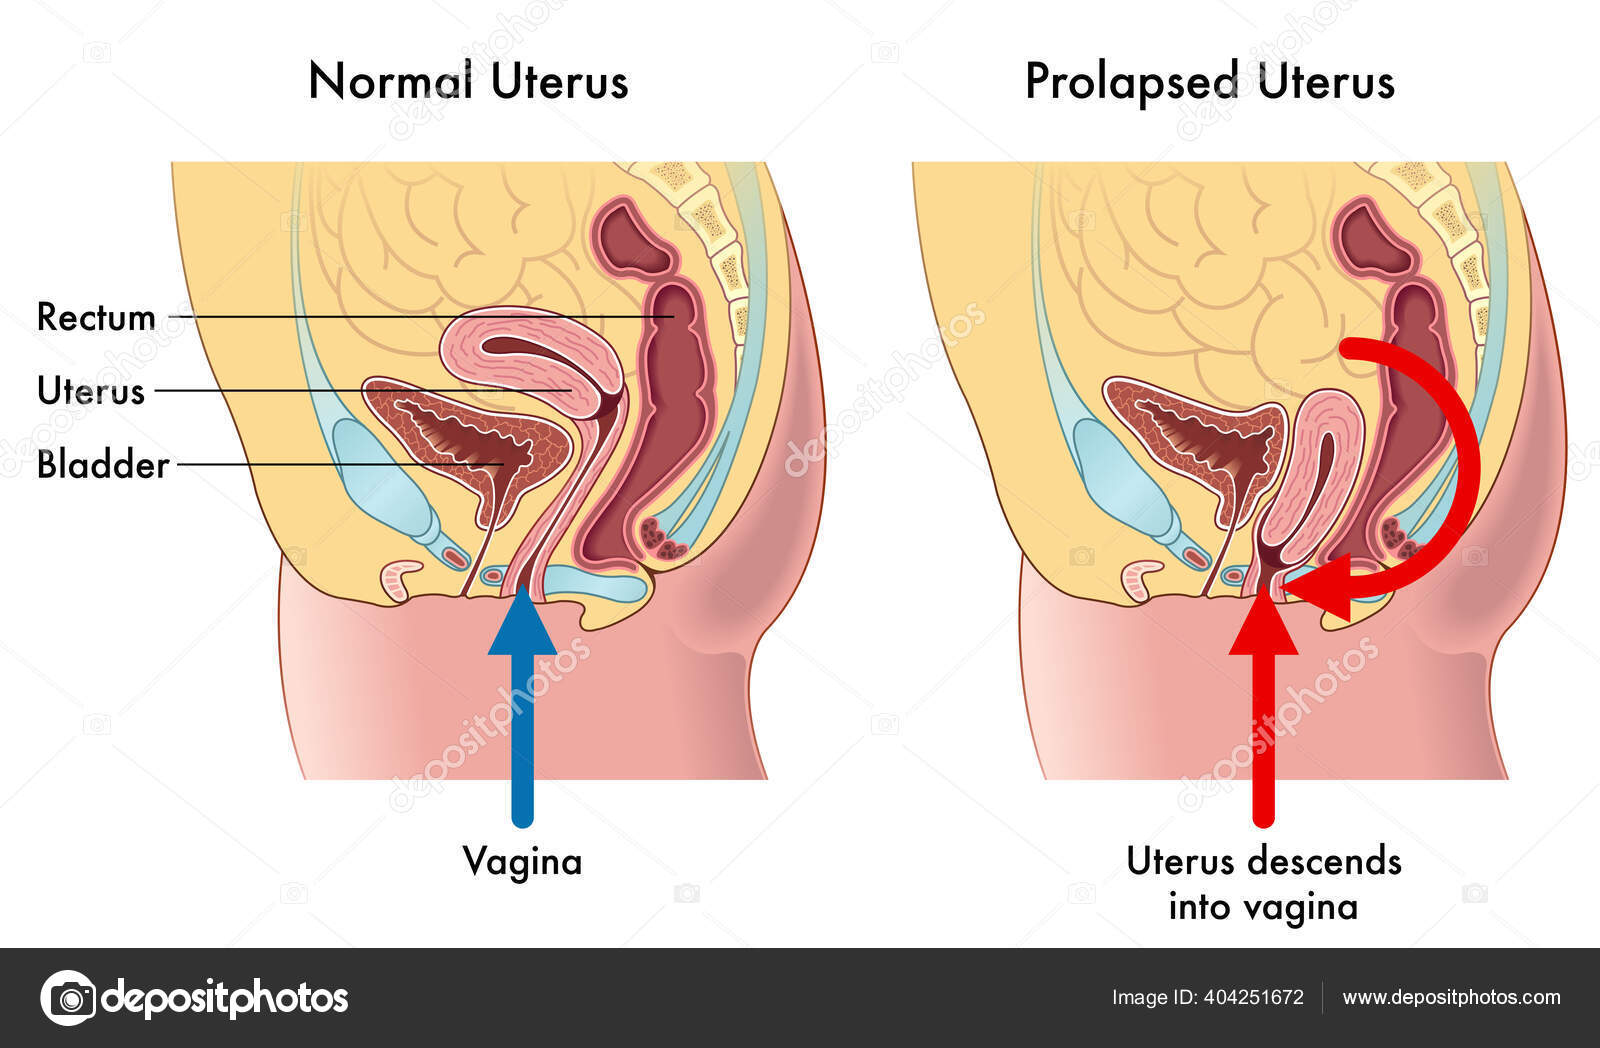 Medical Illustration Showing Difference Normal Uterus Prolapsed